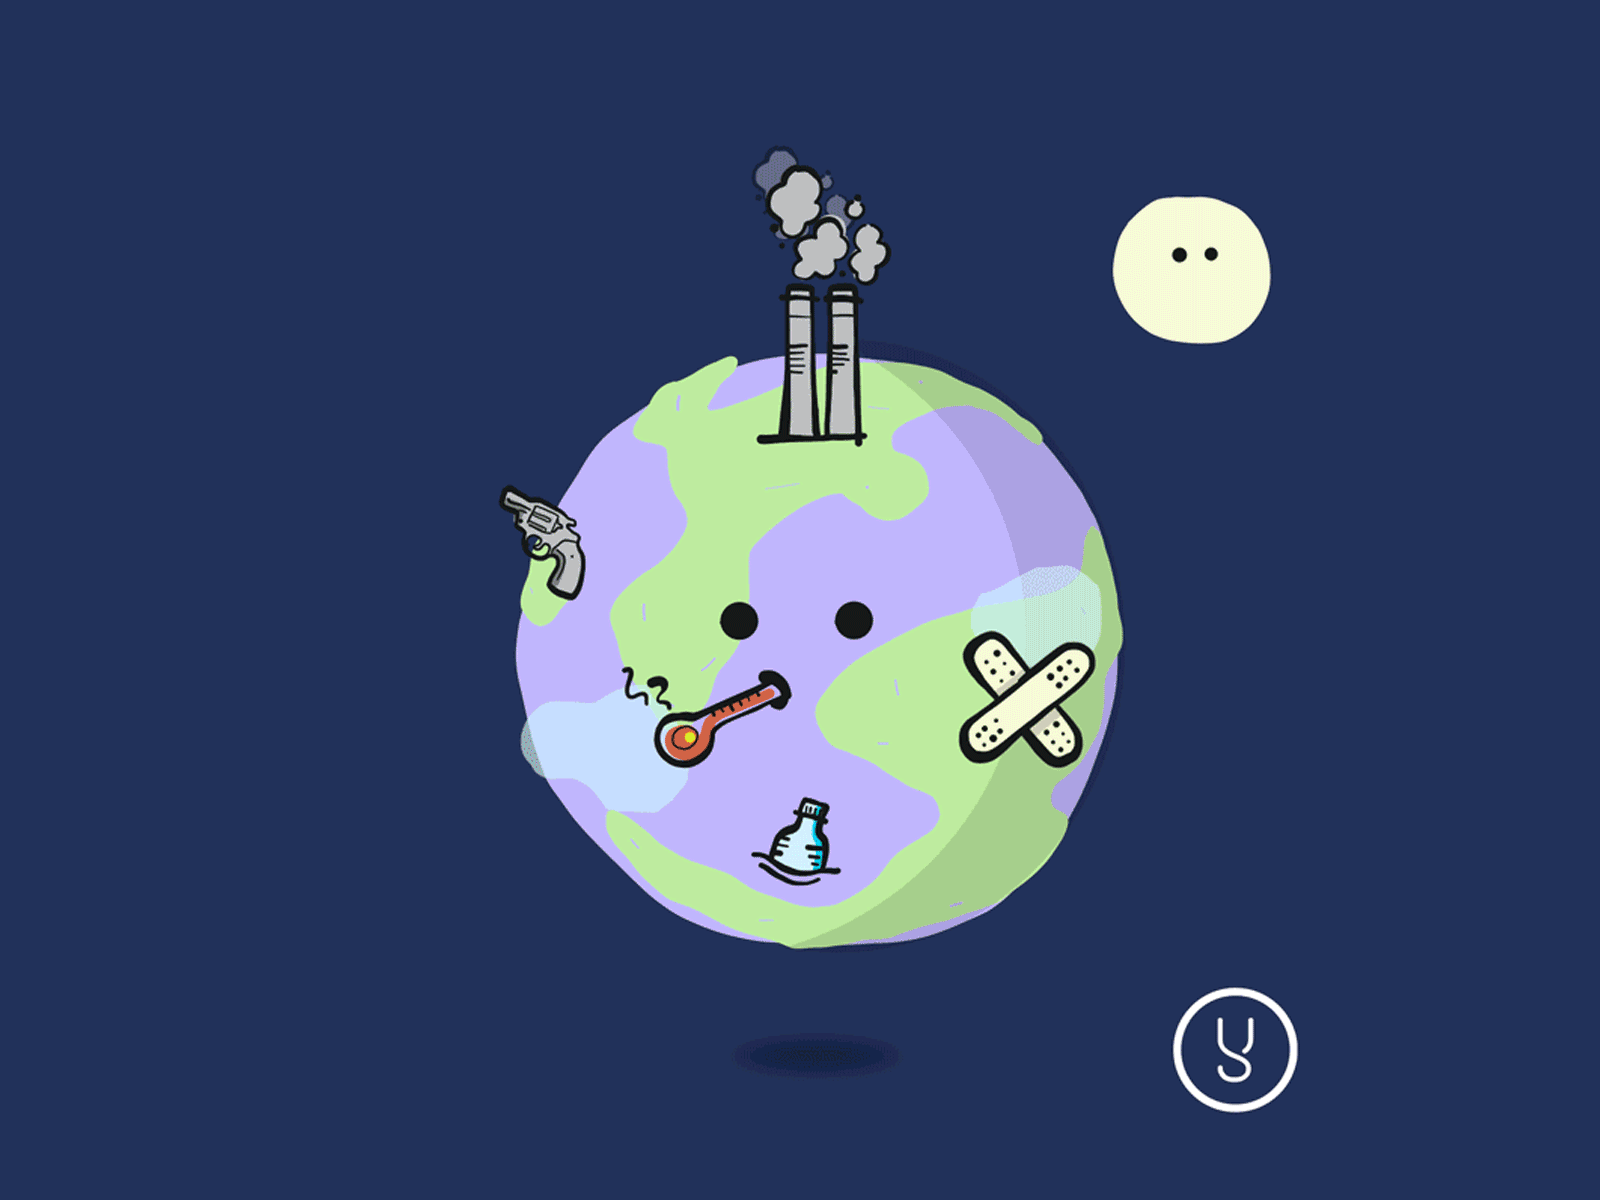 earthday agency animated apple pencil blog post closed earth day event illustration pandemic planet polution virus yellowcatfive